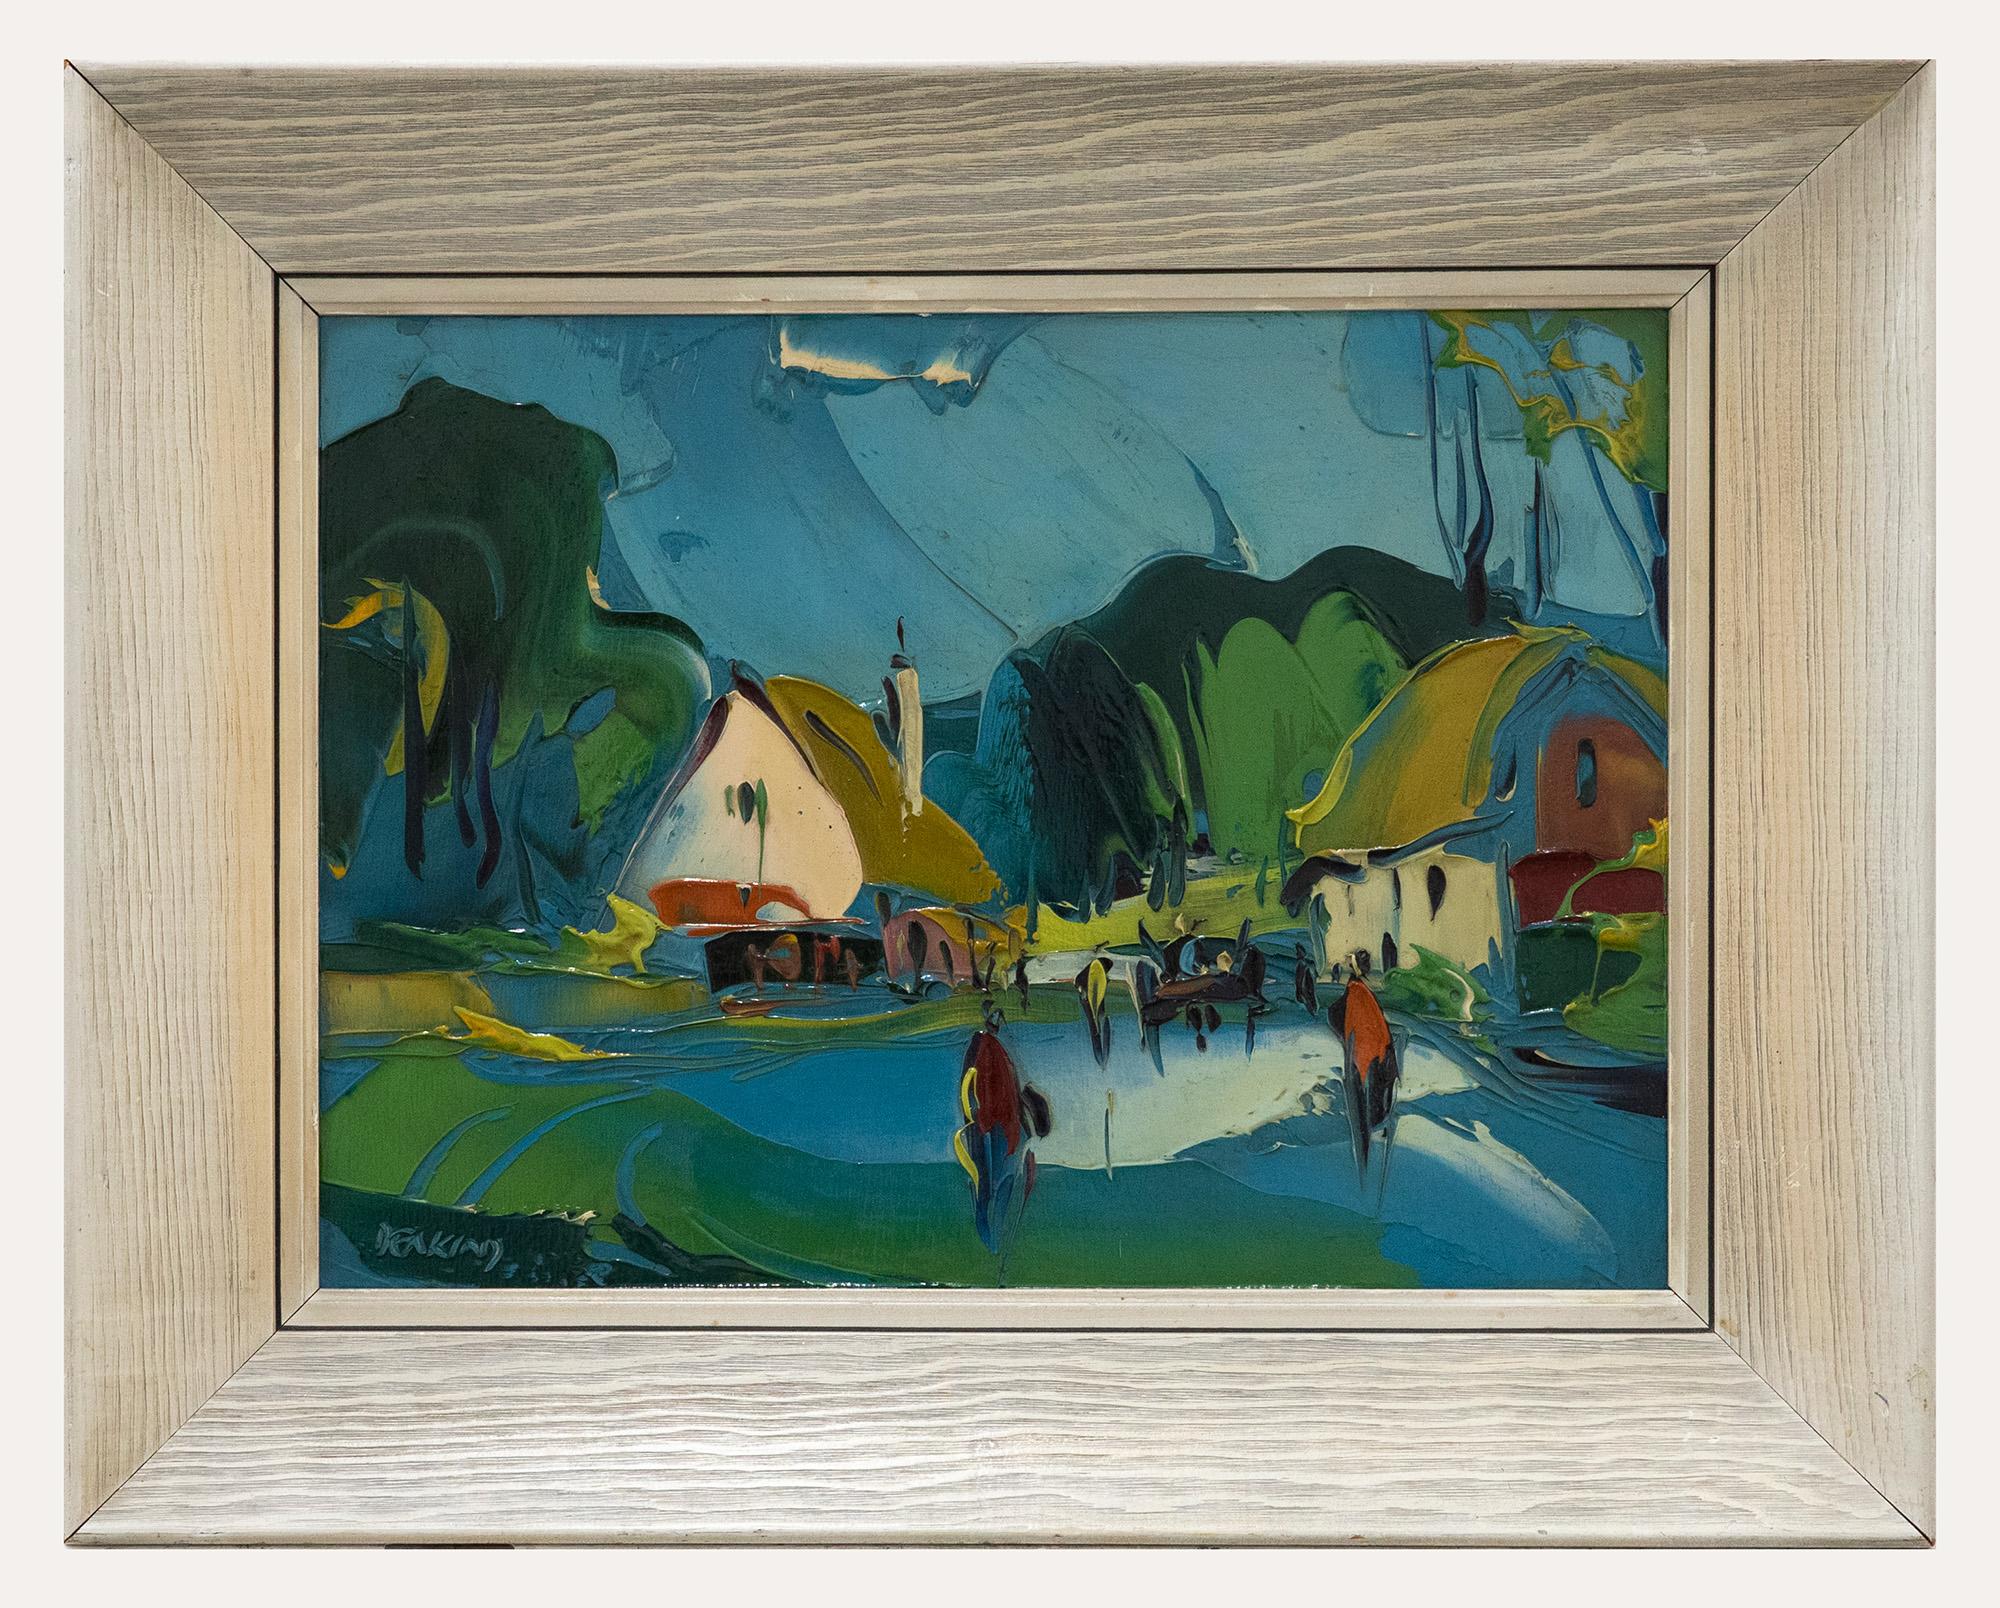 A striking scene depicting a street with figures on a country lane. The artist captures the scene in a vivid colour palette and an expressive technique using a palette knife. Signed to the lower right. The painting is sealed with a varnish giving